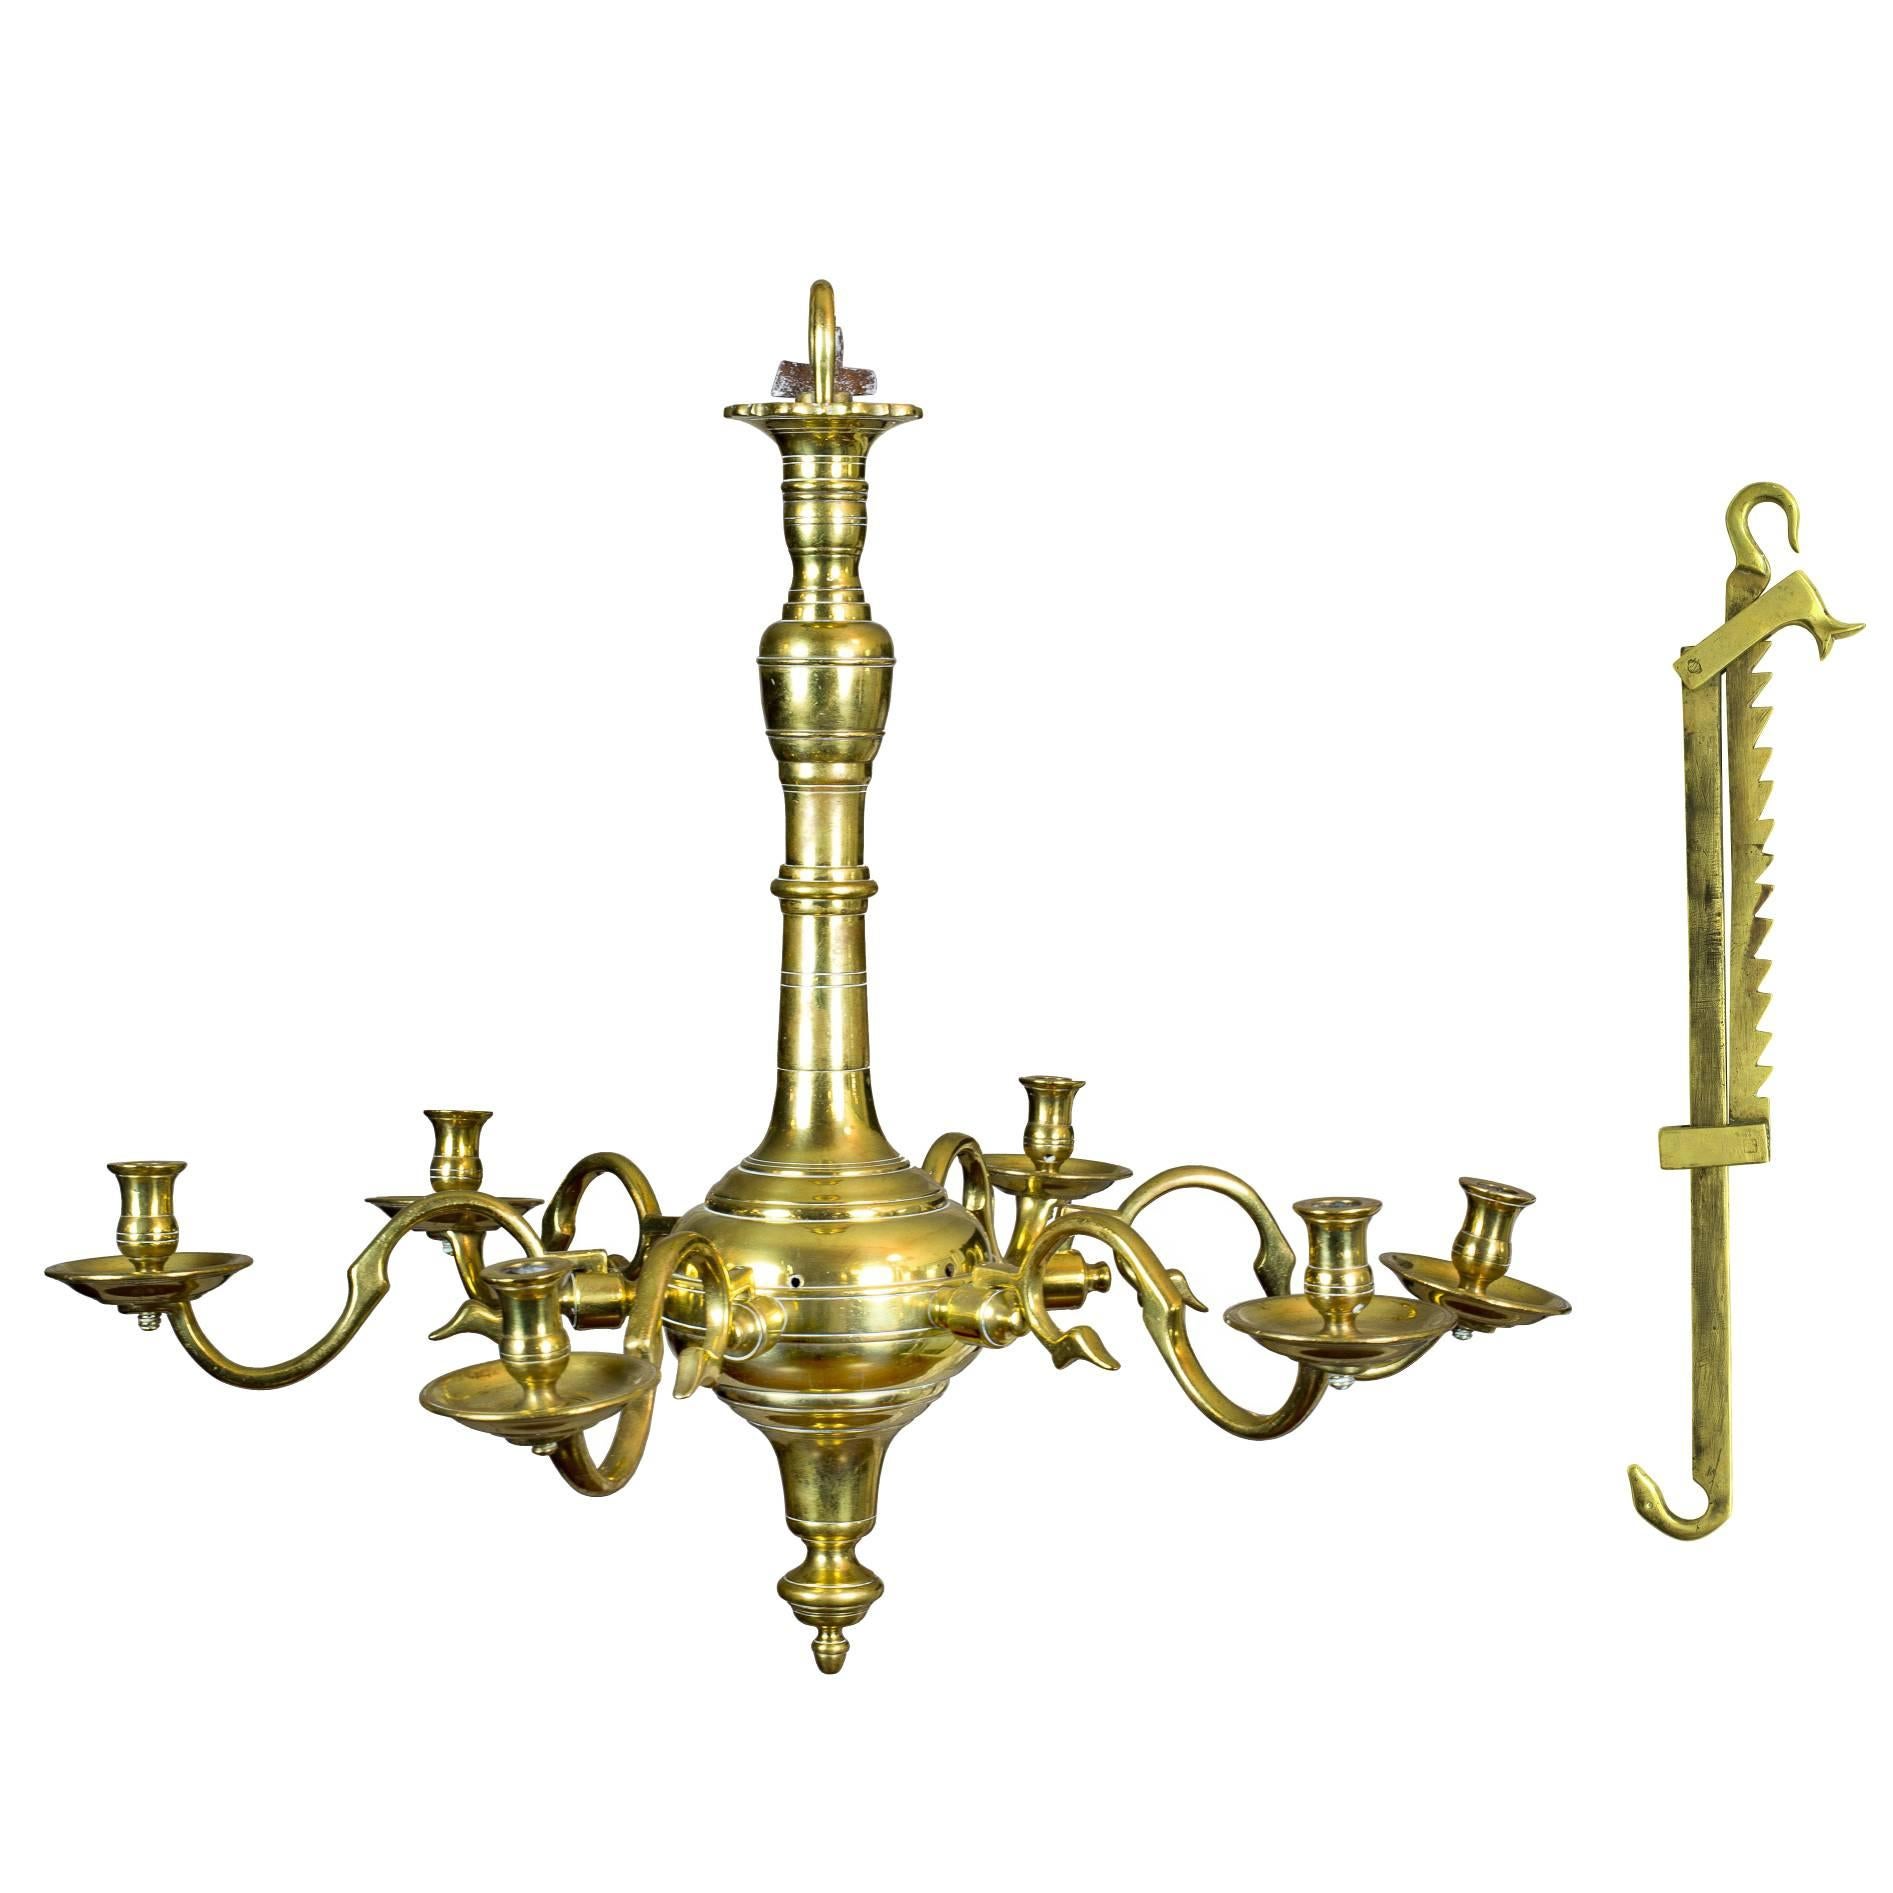 Fine Classic Six-Light English Brass Chandelier with Trammel, Both circa 1750 For Sale